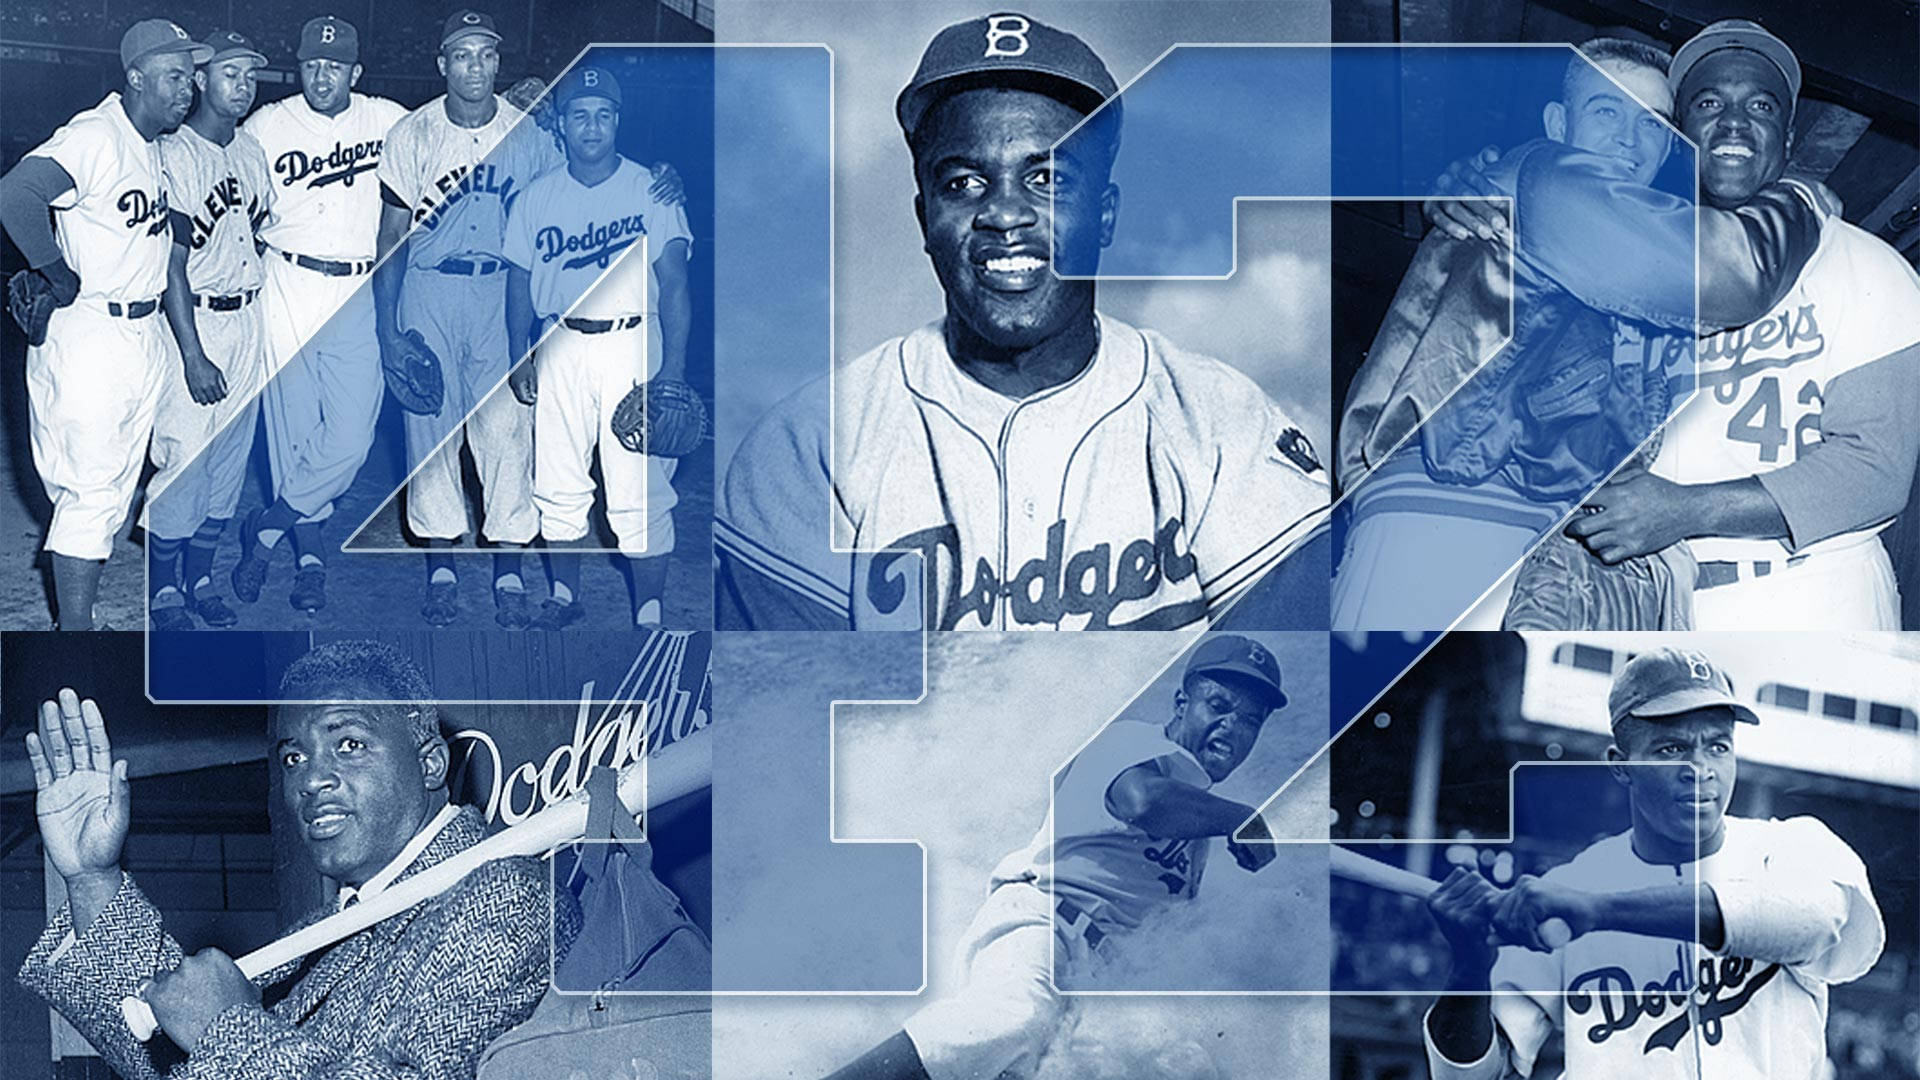 BROOKLYN DODGERS JACKIE ROBINSON CLASSIC ICONIC HISTORY IN BASEBALL COLLAGE